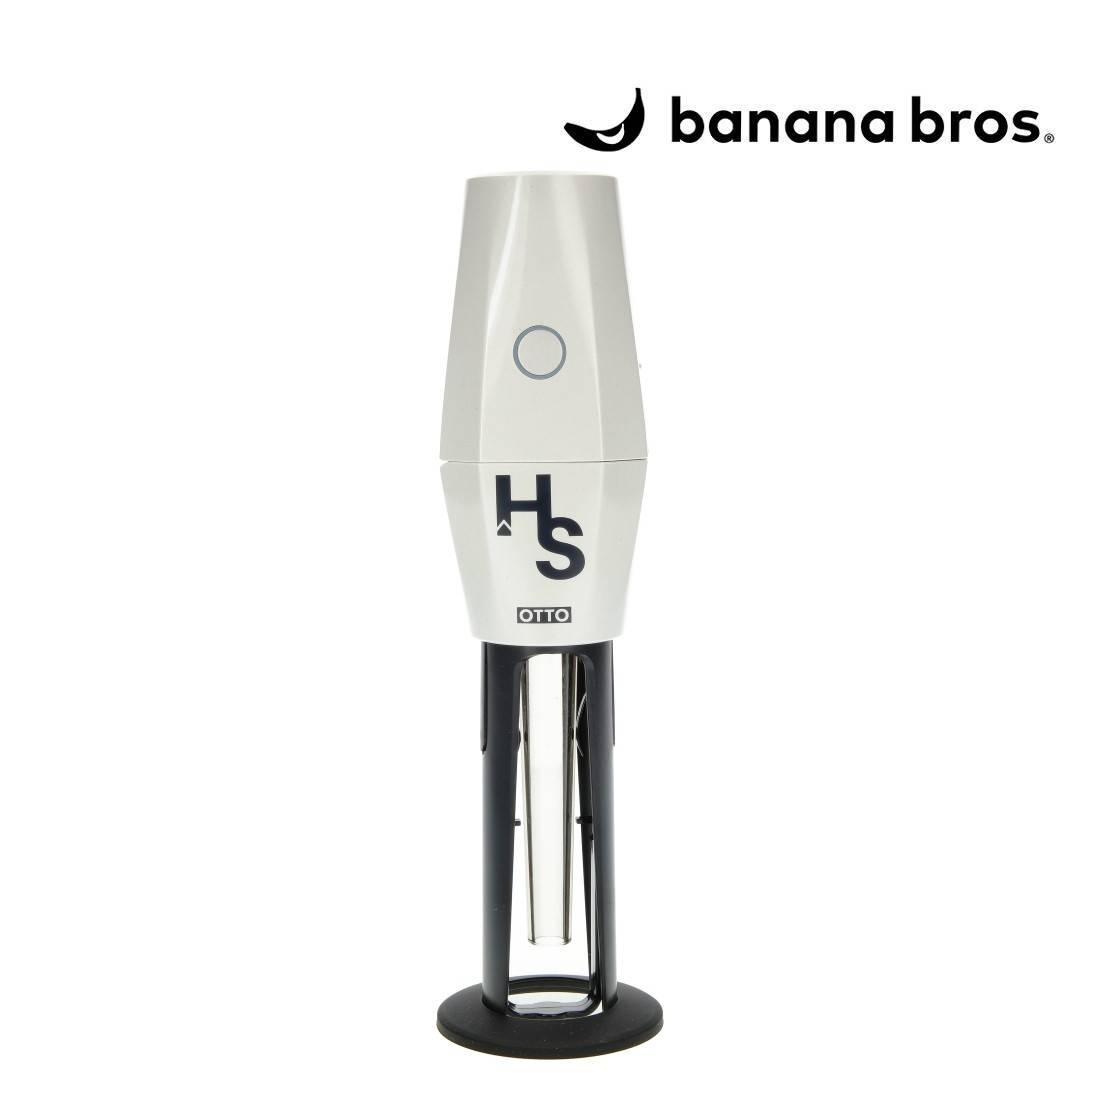 Grinder OTTO, Banana Bros Joints Automatiques - Grow Barato